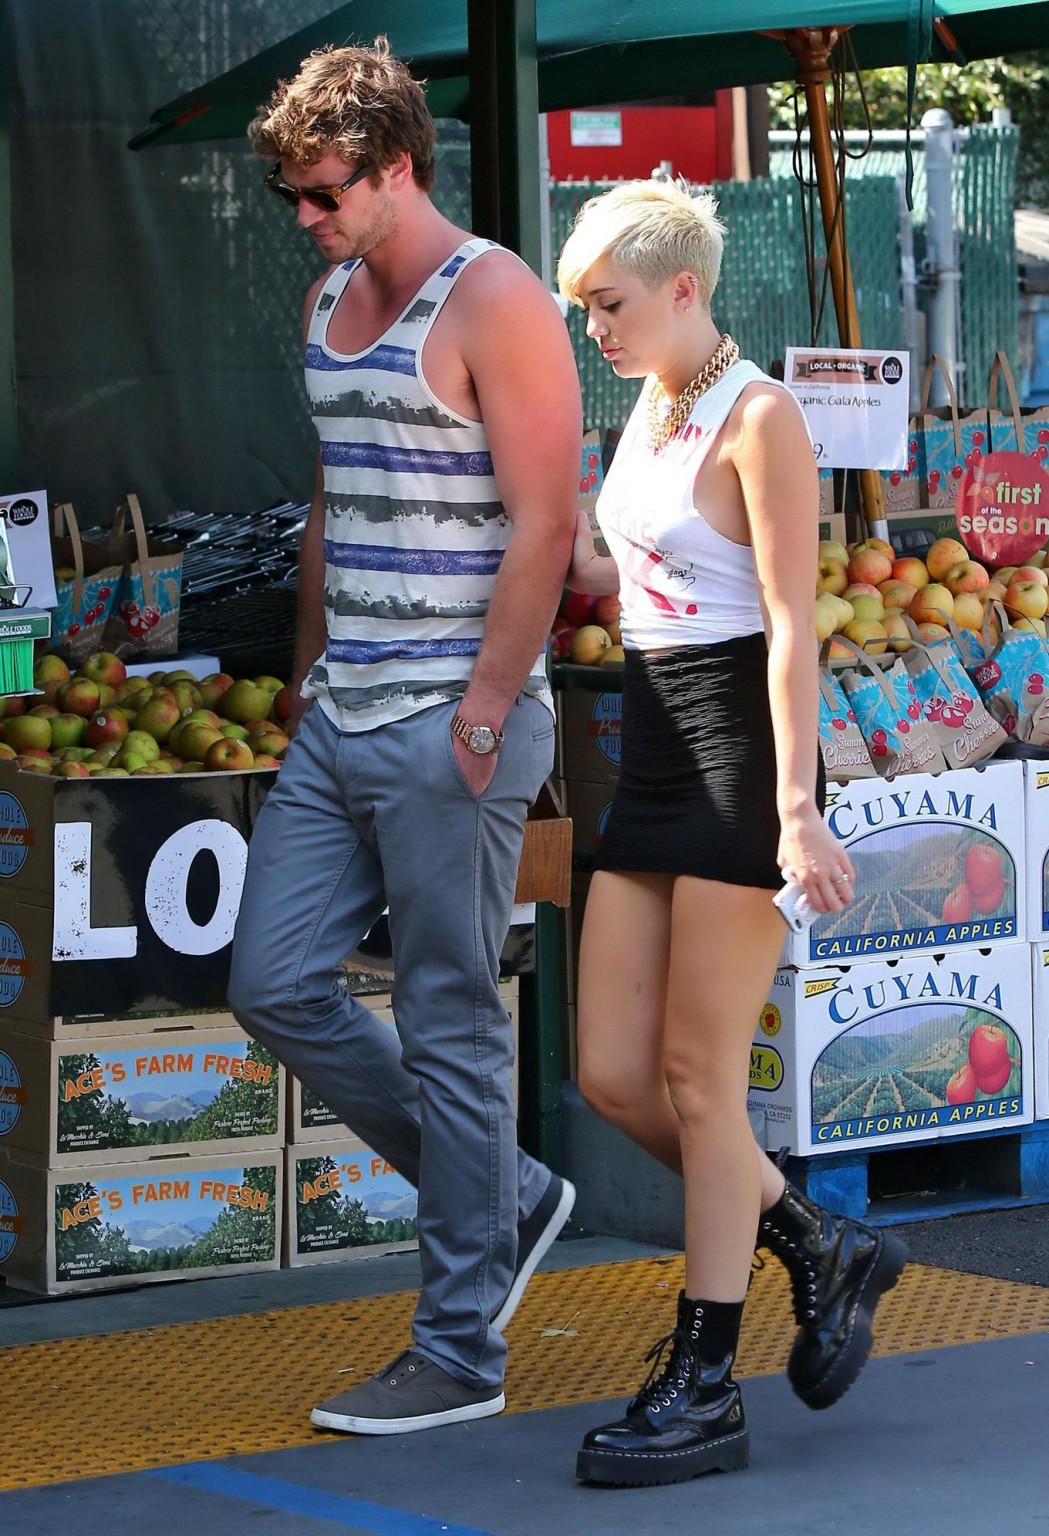 Miley Cyrus braless showing side boob outside the 'Whole Foods' in LA #75252877